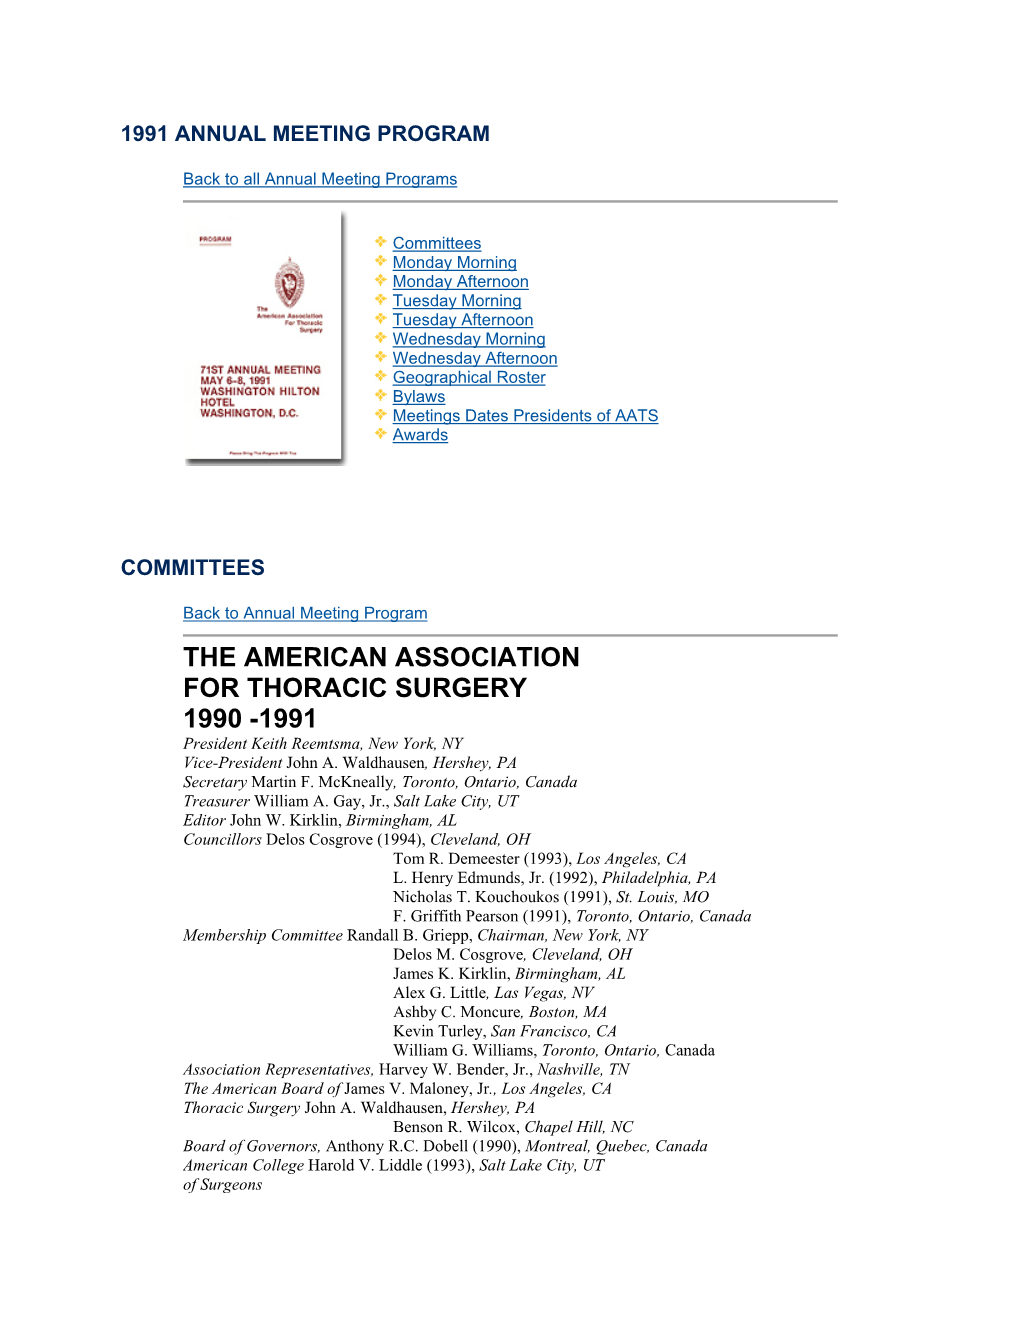 THE AMERICAN ASSOCIATION for THORACIC SURGERY 1990 -1991 President Keith Reemtsma, New York, NY Vice-President John A